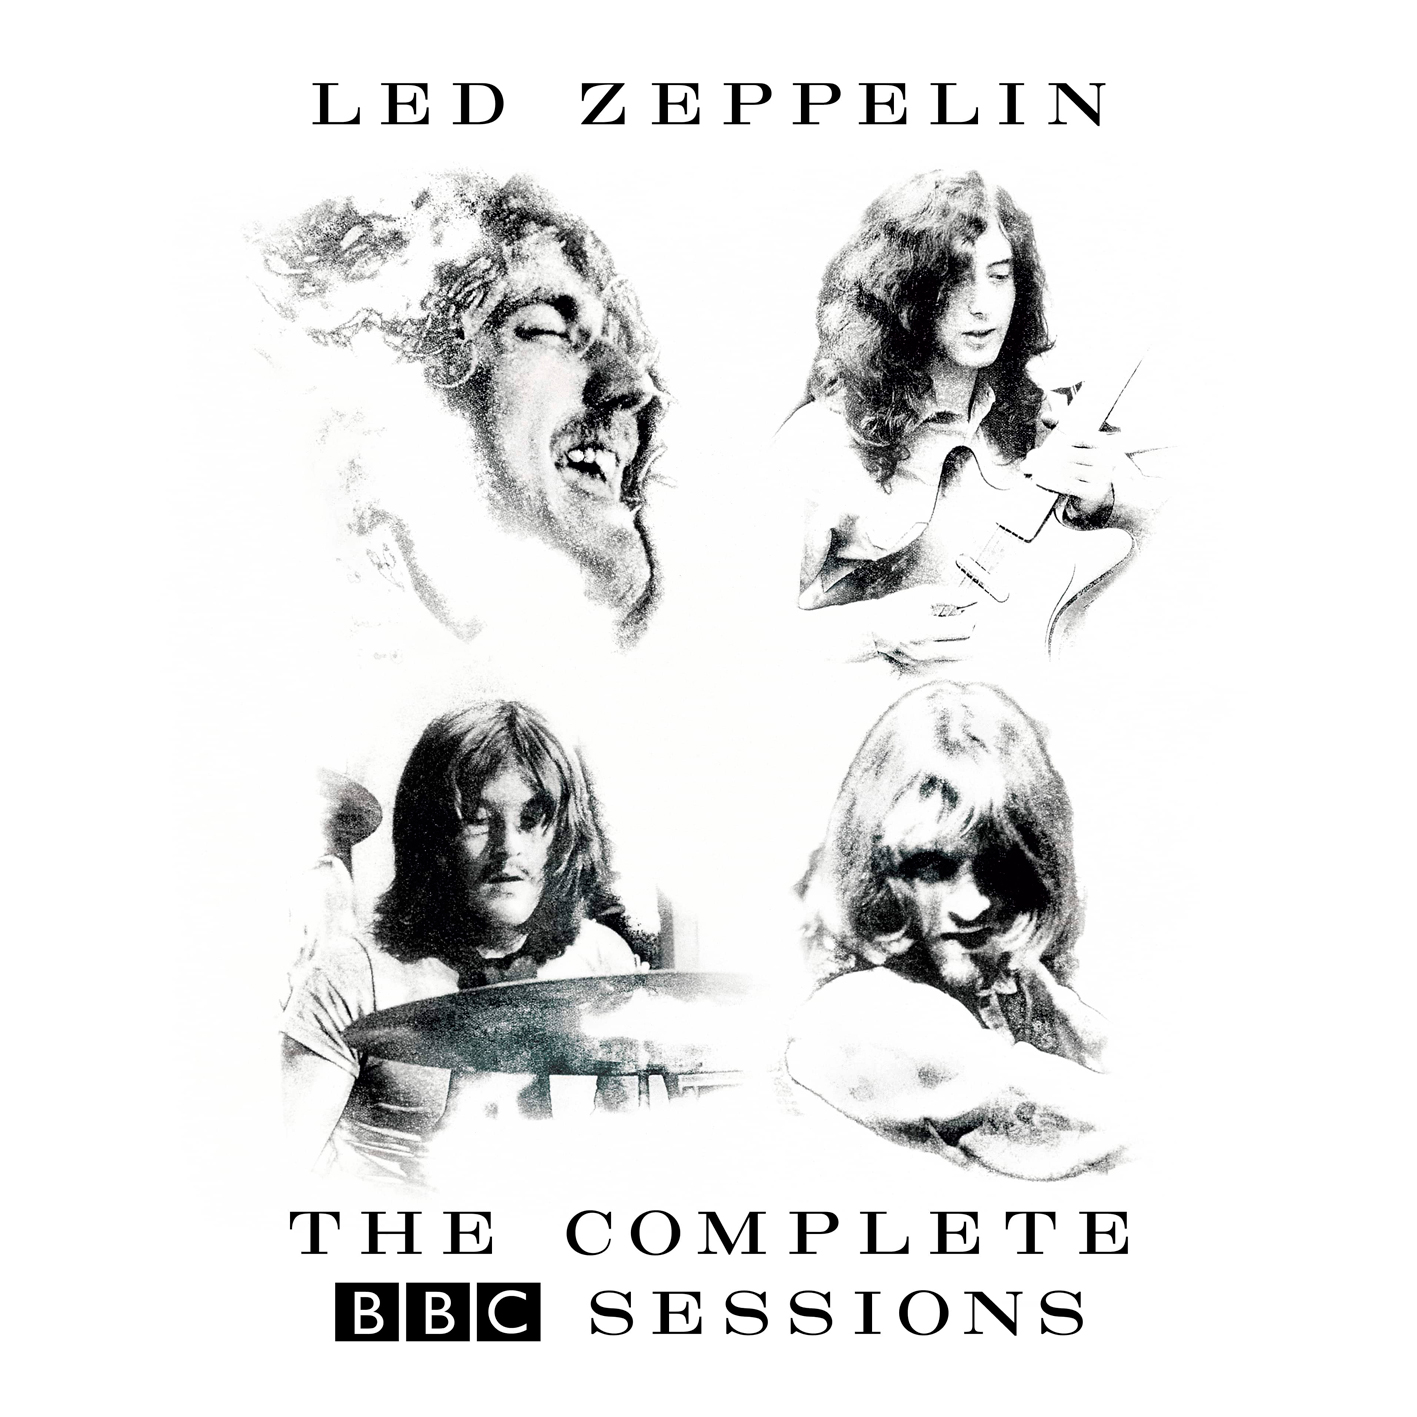 Led Zeppelin – The Complete BBC Sessions (2016) [HDTracks FLAC 24bit/96kHz]